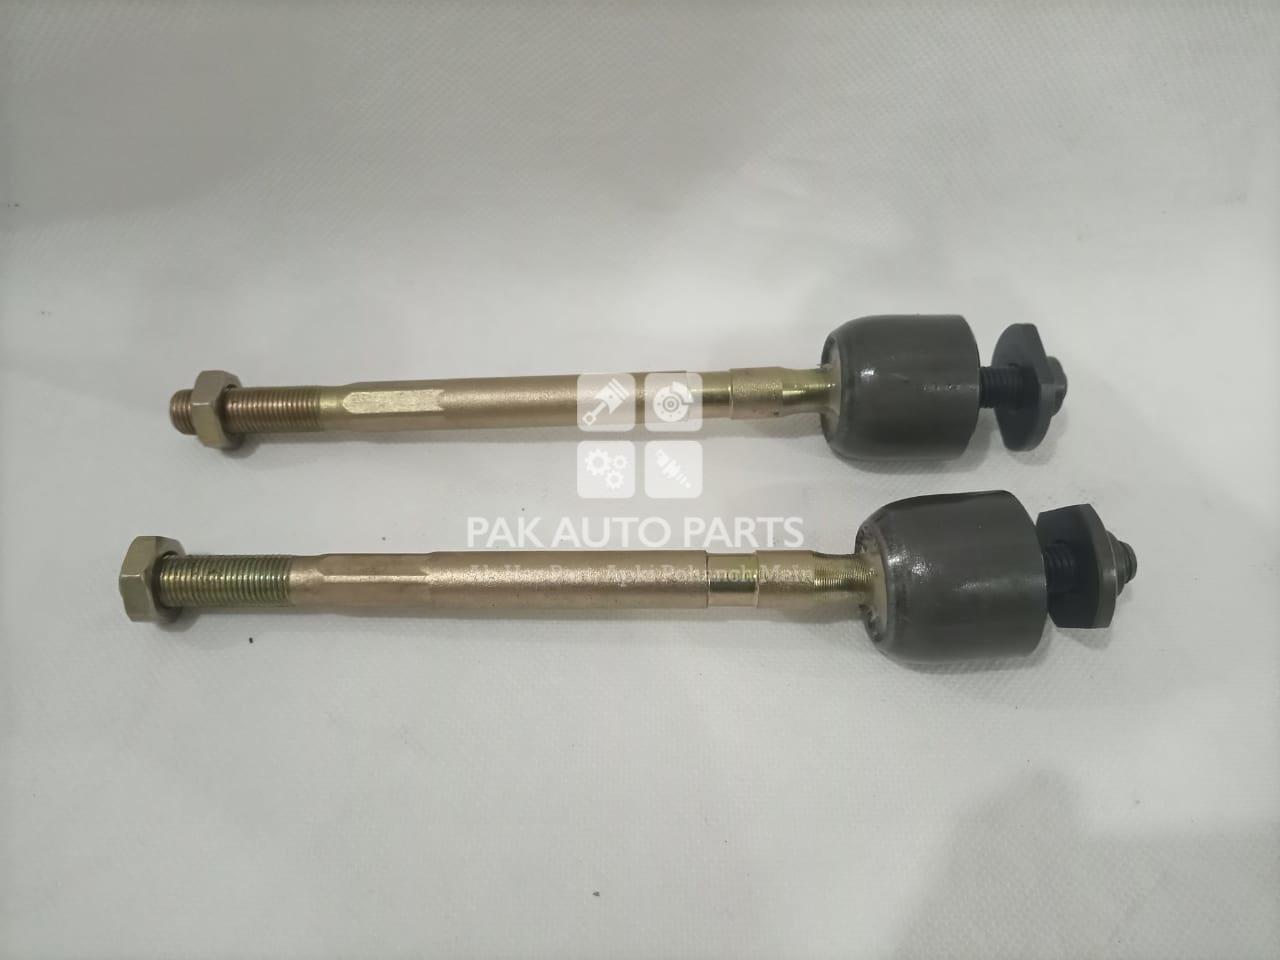 Picture of Daihatsu Cuore Front Wheel Rack End Set